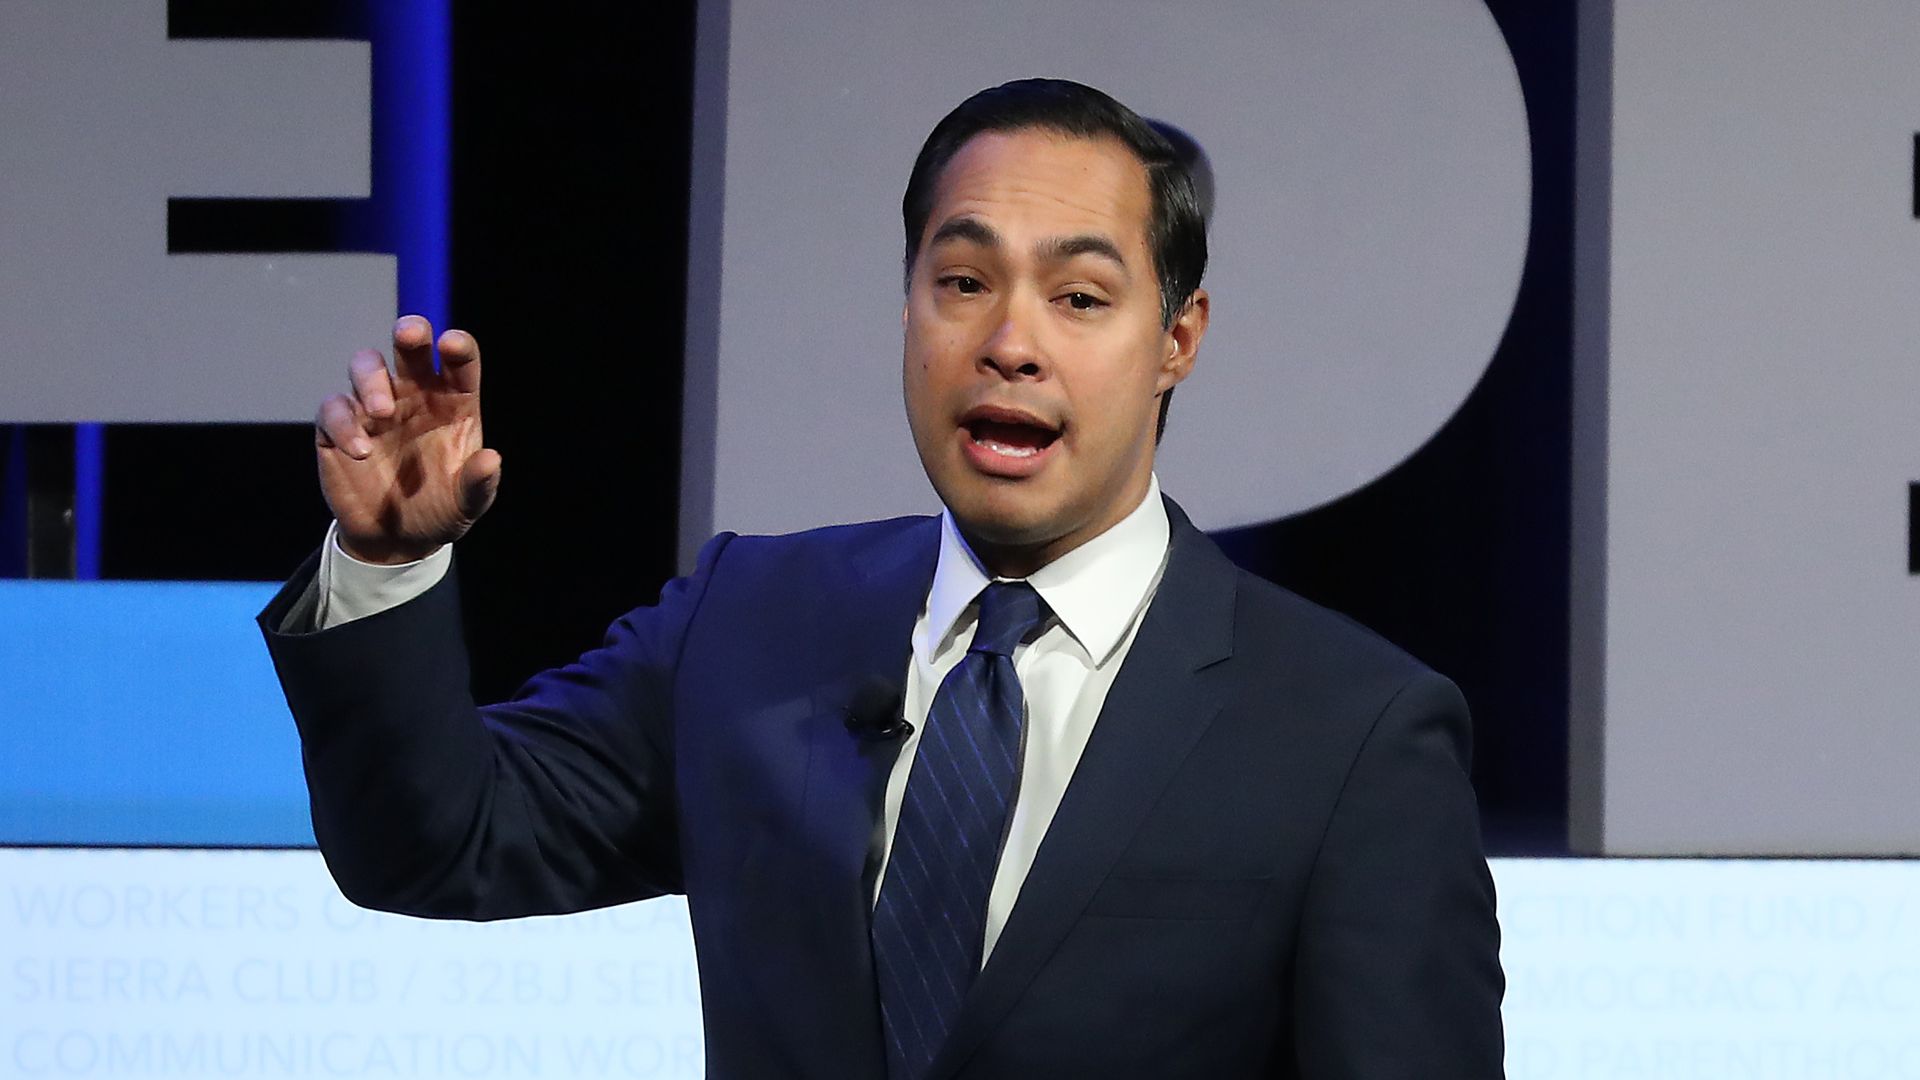  2020 Democratic presidential candidate Julian Castro says President Trump's immigration policies are draconian.